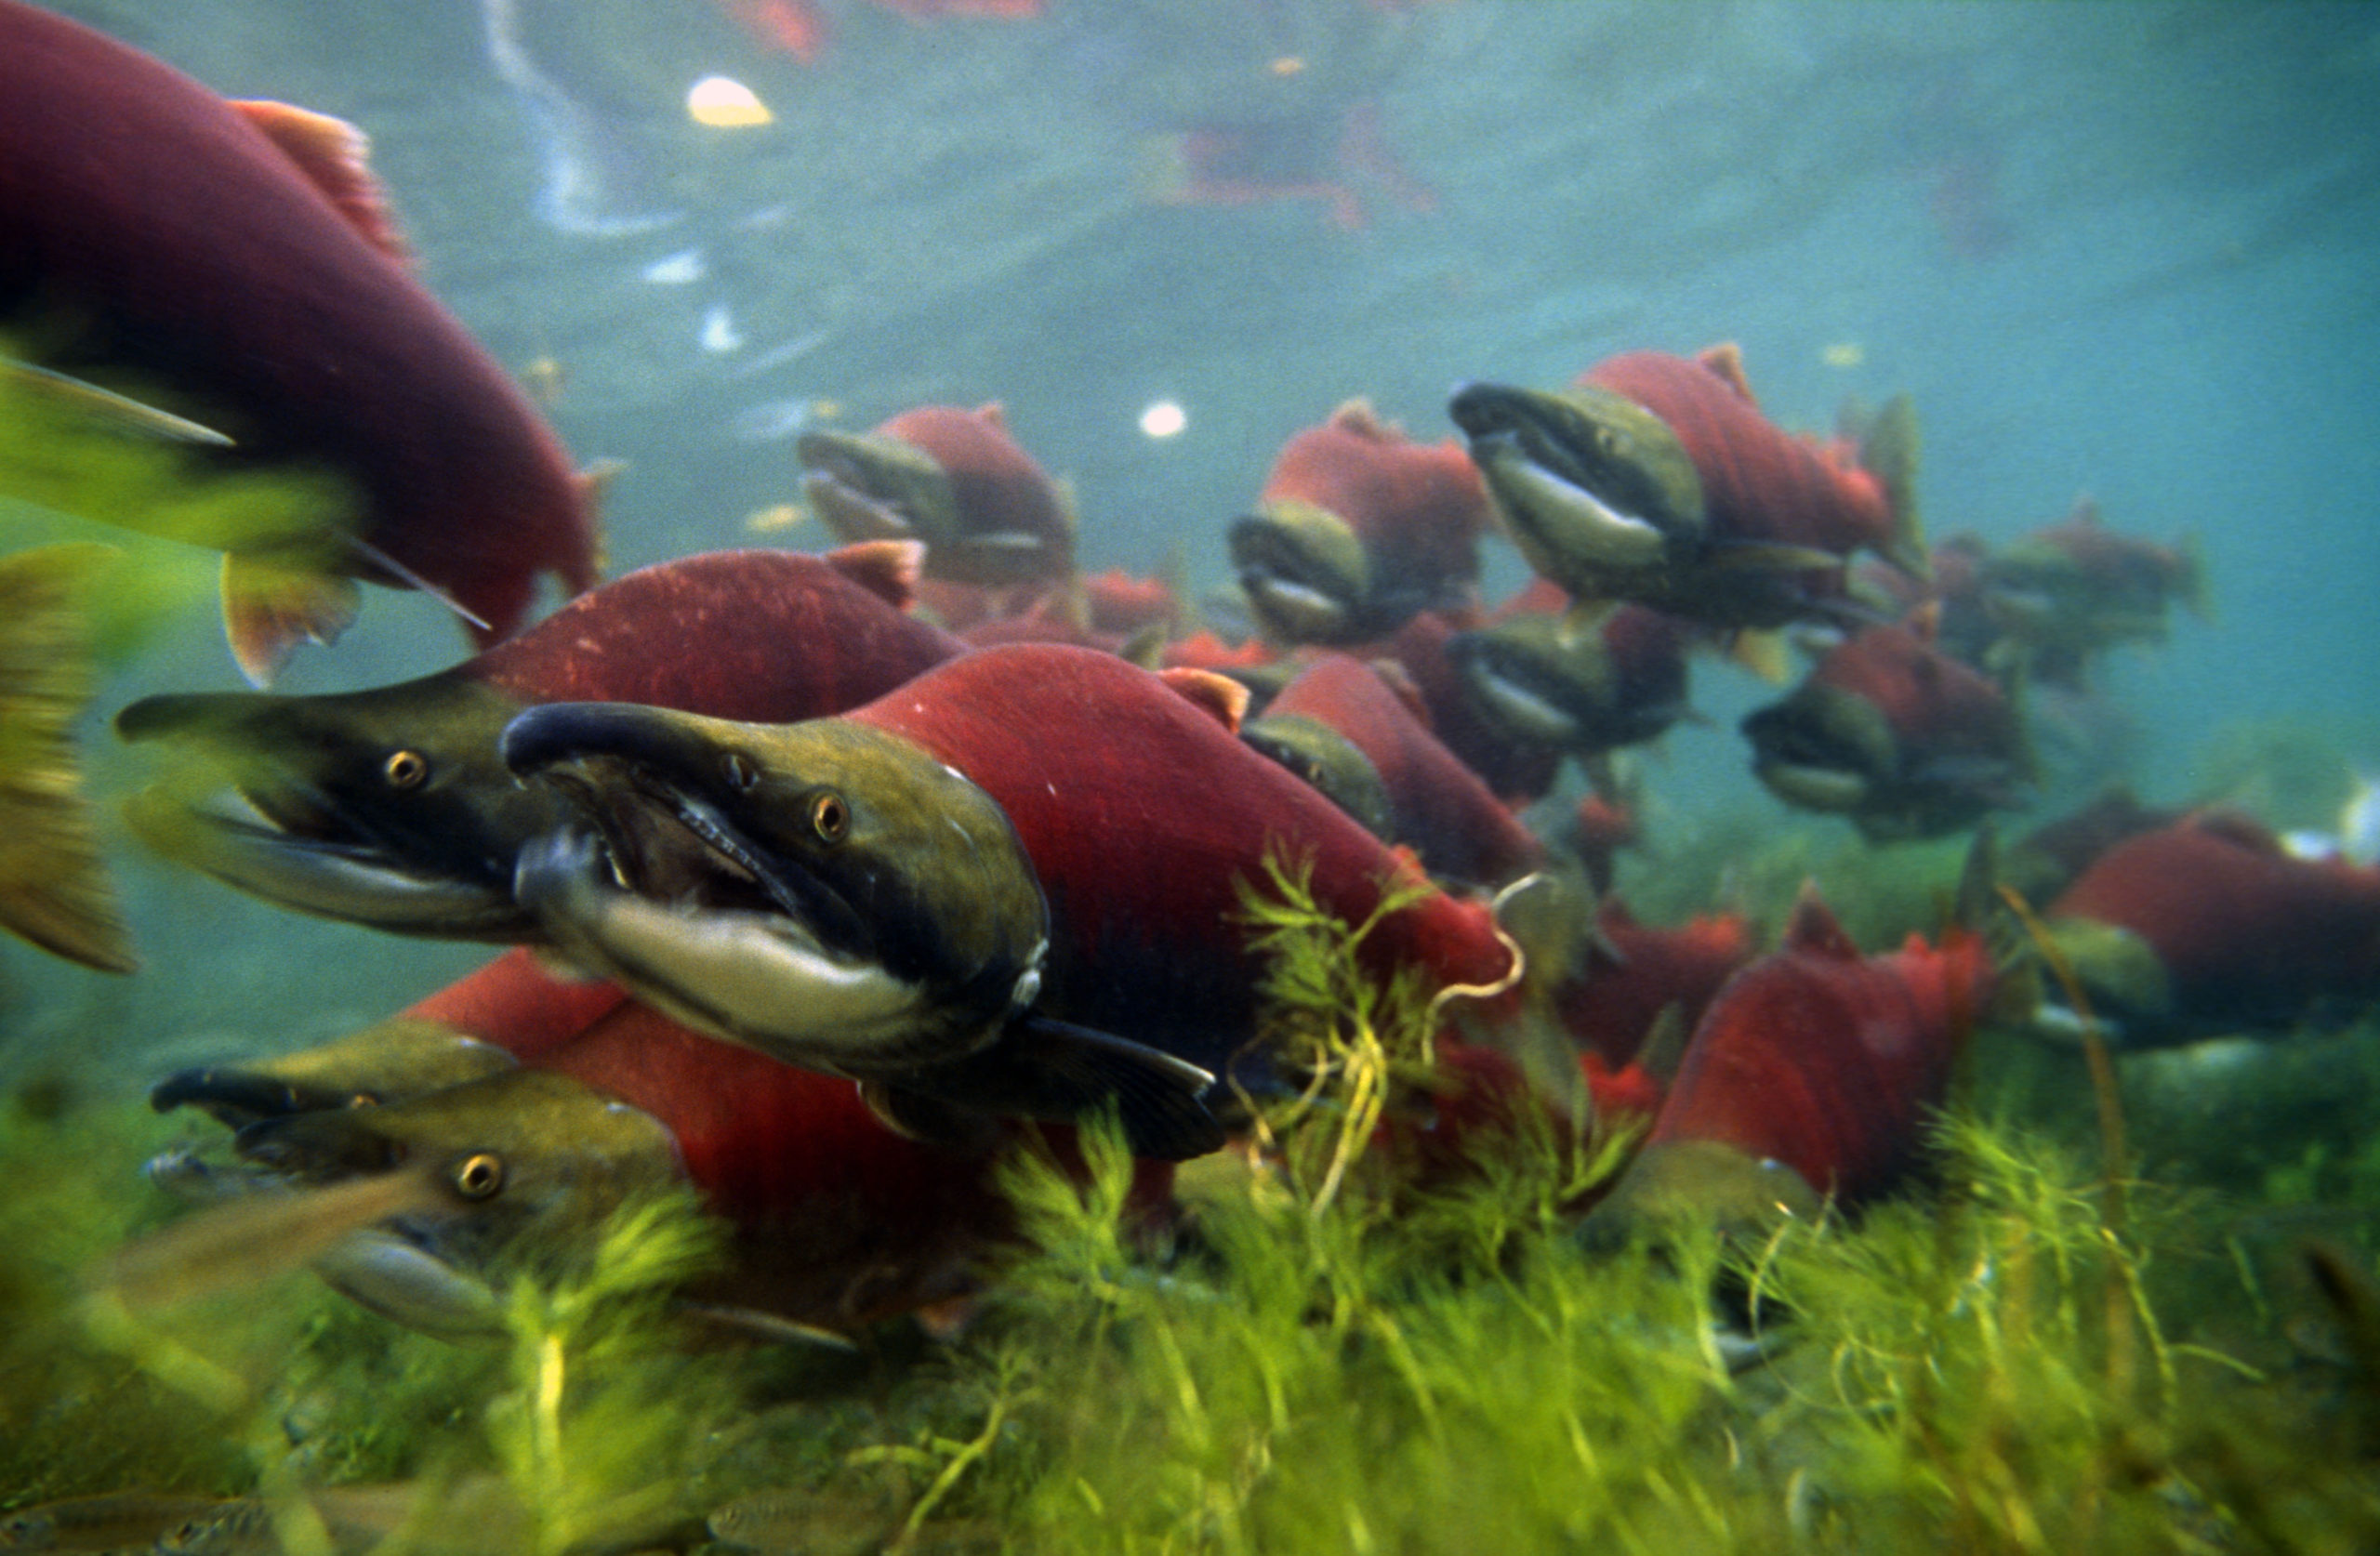 Sockeye salmon (Oncorhynchus nerka), adults migrating up the river to spawn